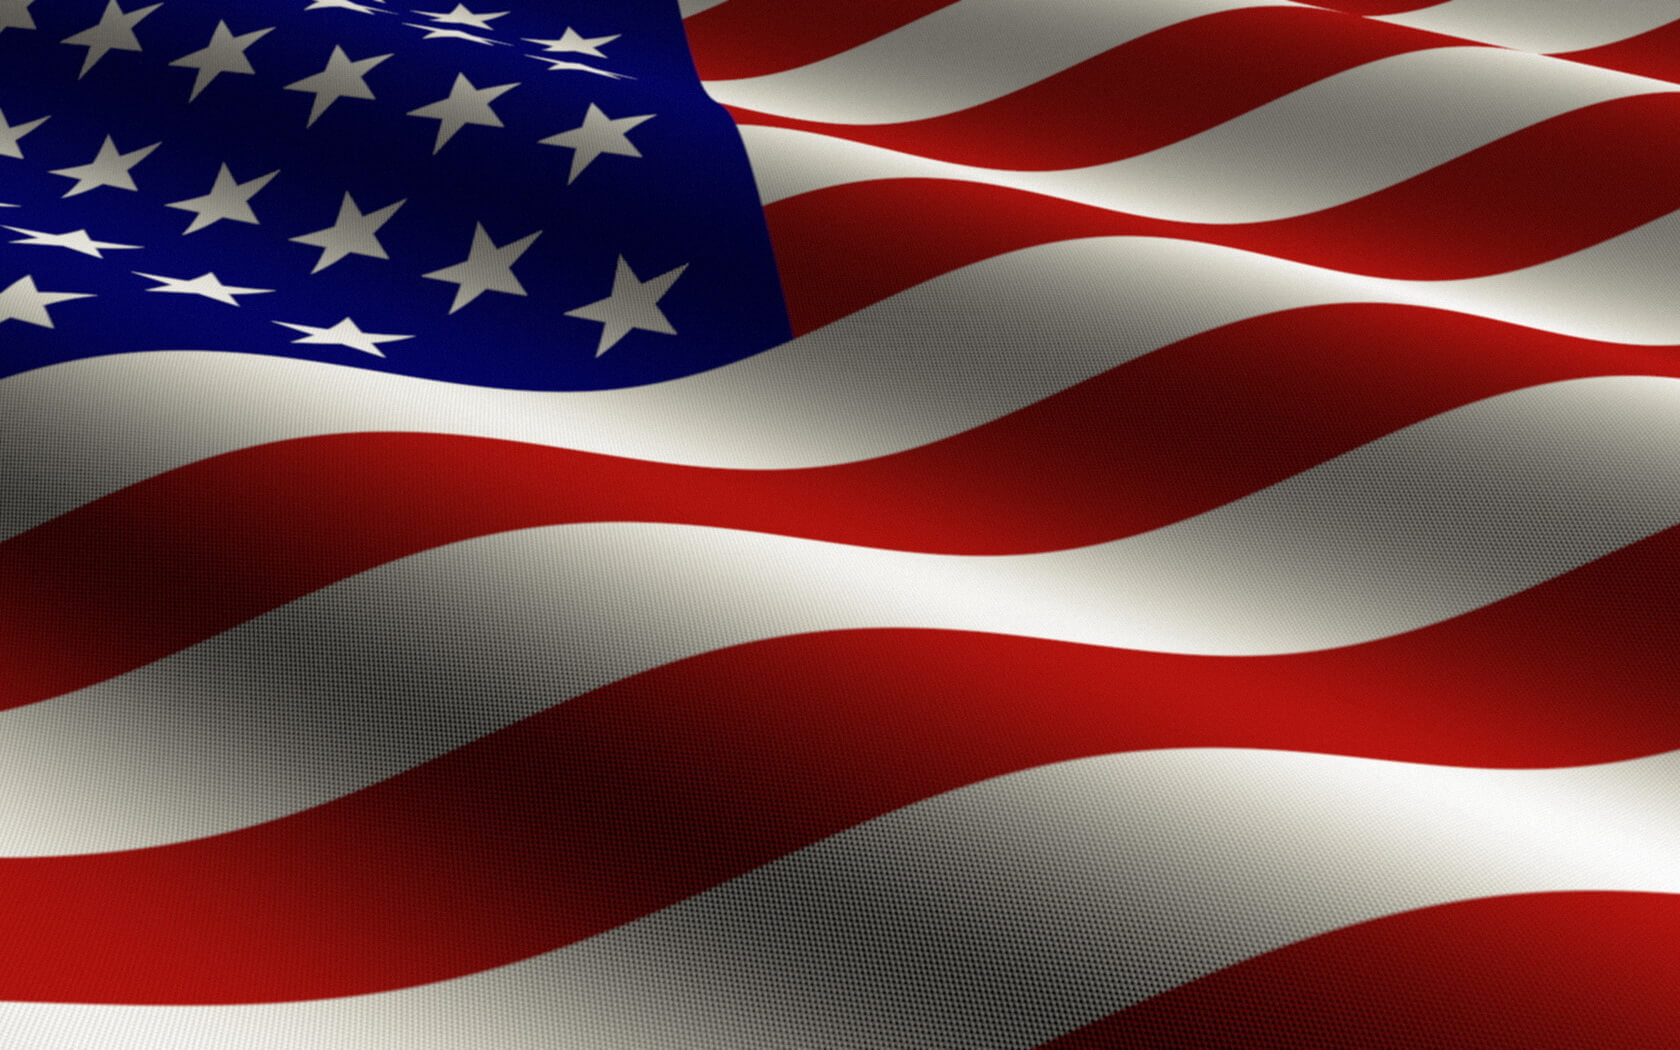 American Flag Backgrounds For Powerpoint Templates – Ppt Within American Flag Powerpoint Template